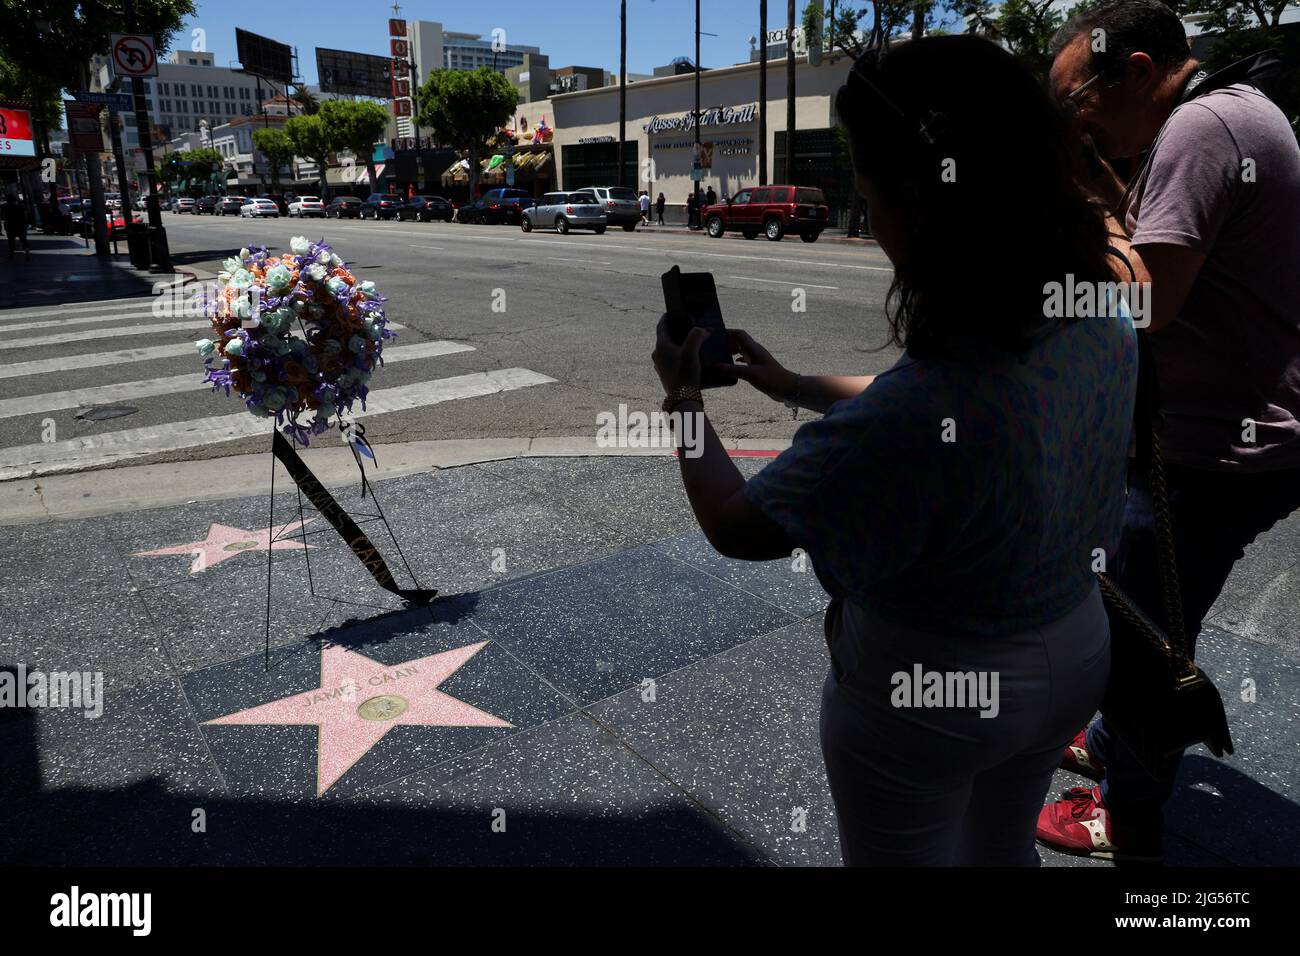 People take pictures of the late actor James Caan's star on the Hollywood Walk of Fame, Los Angeles, California, U.S., July 7, 2022 REUTERS/Mario Anzuoni Stock Photo